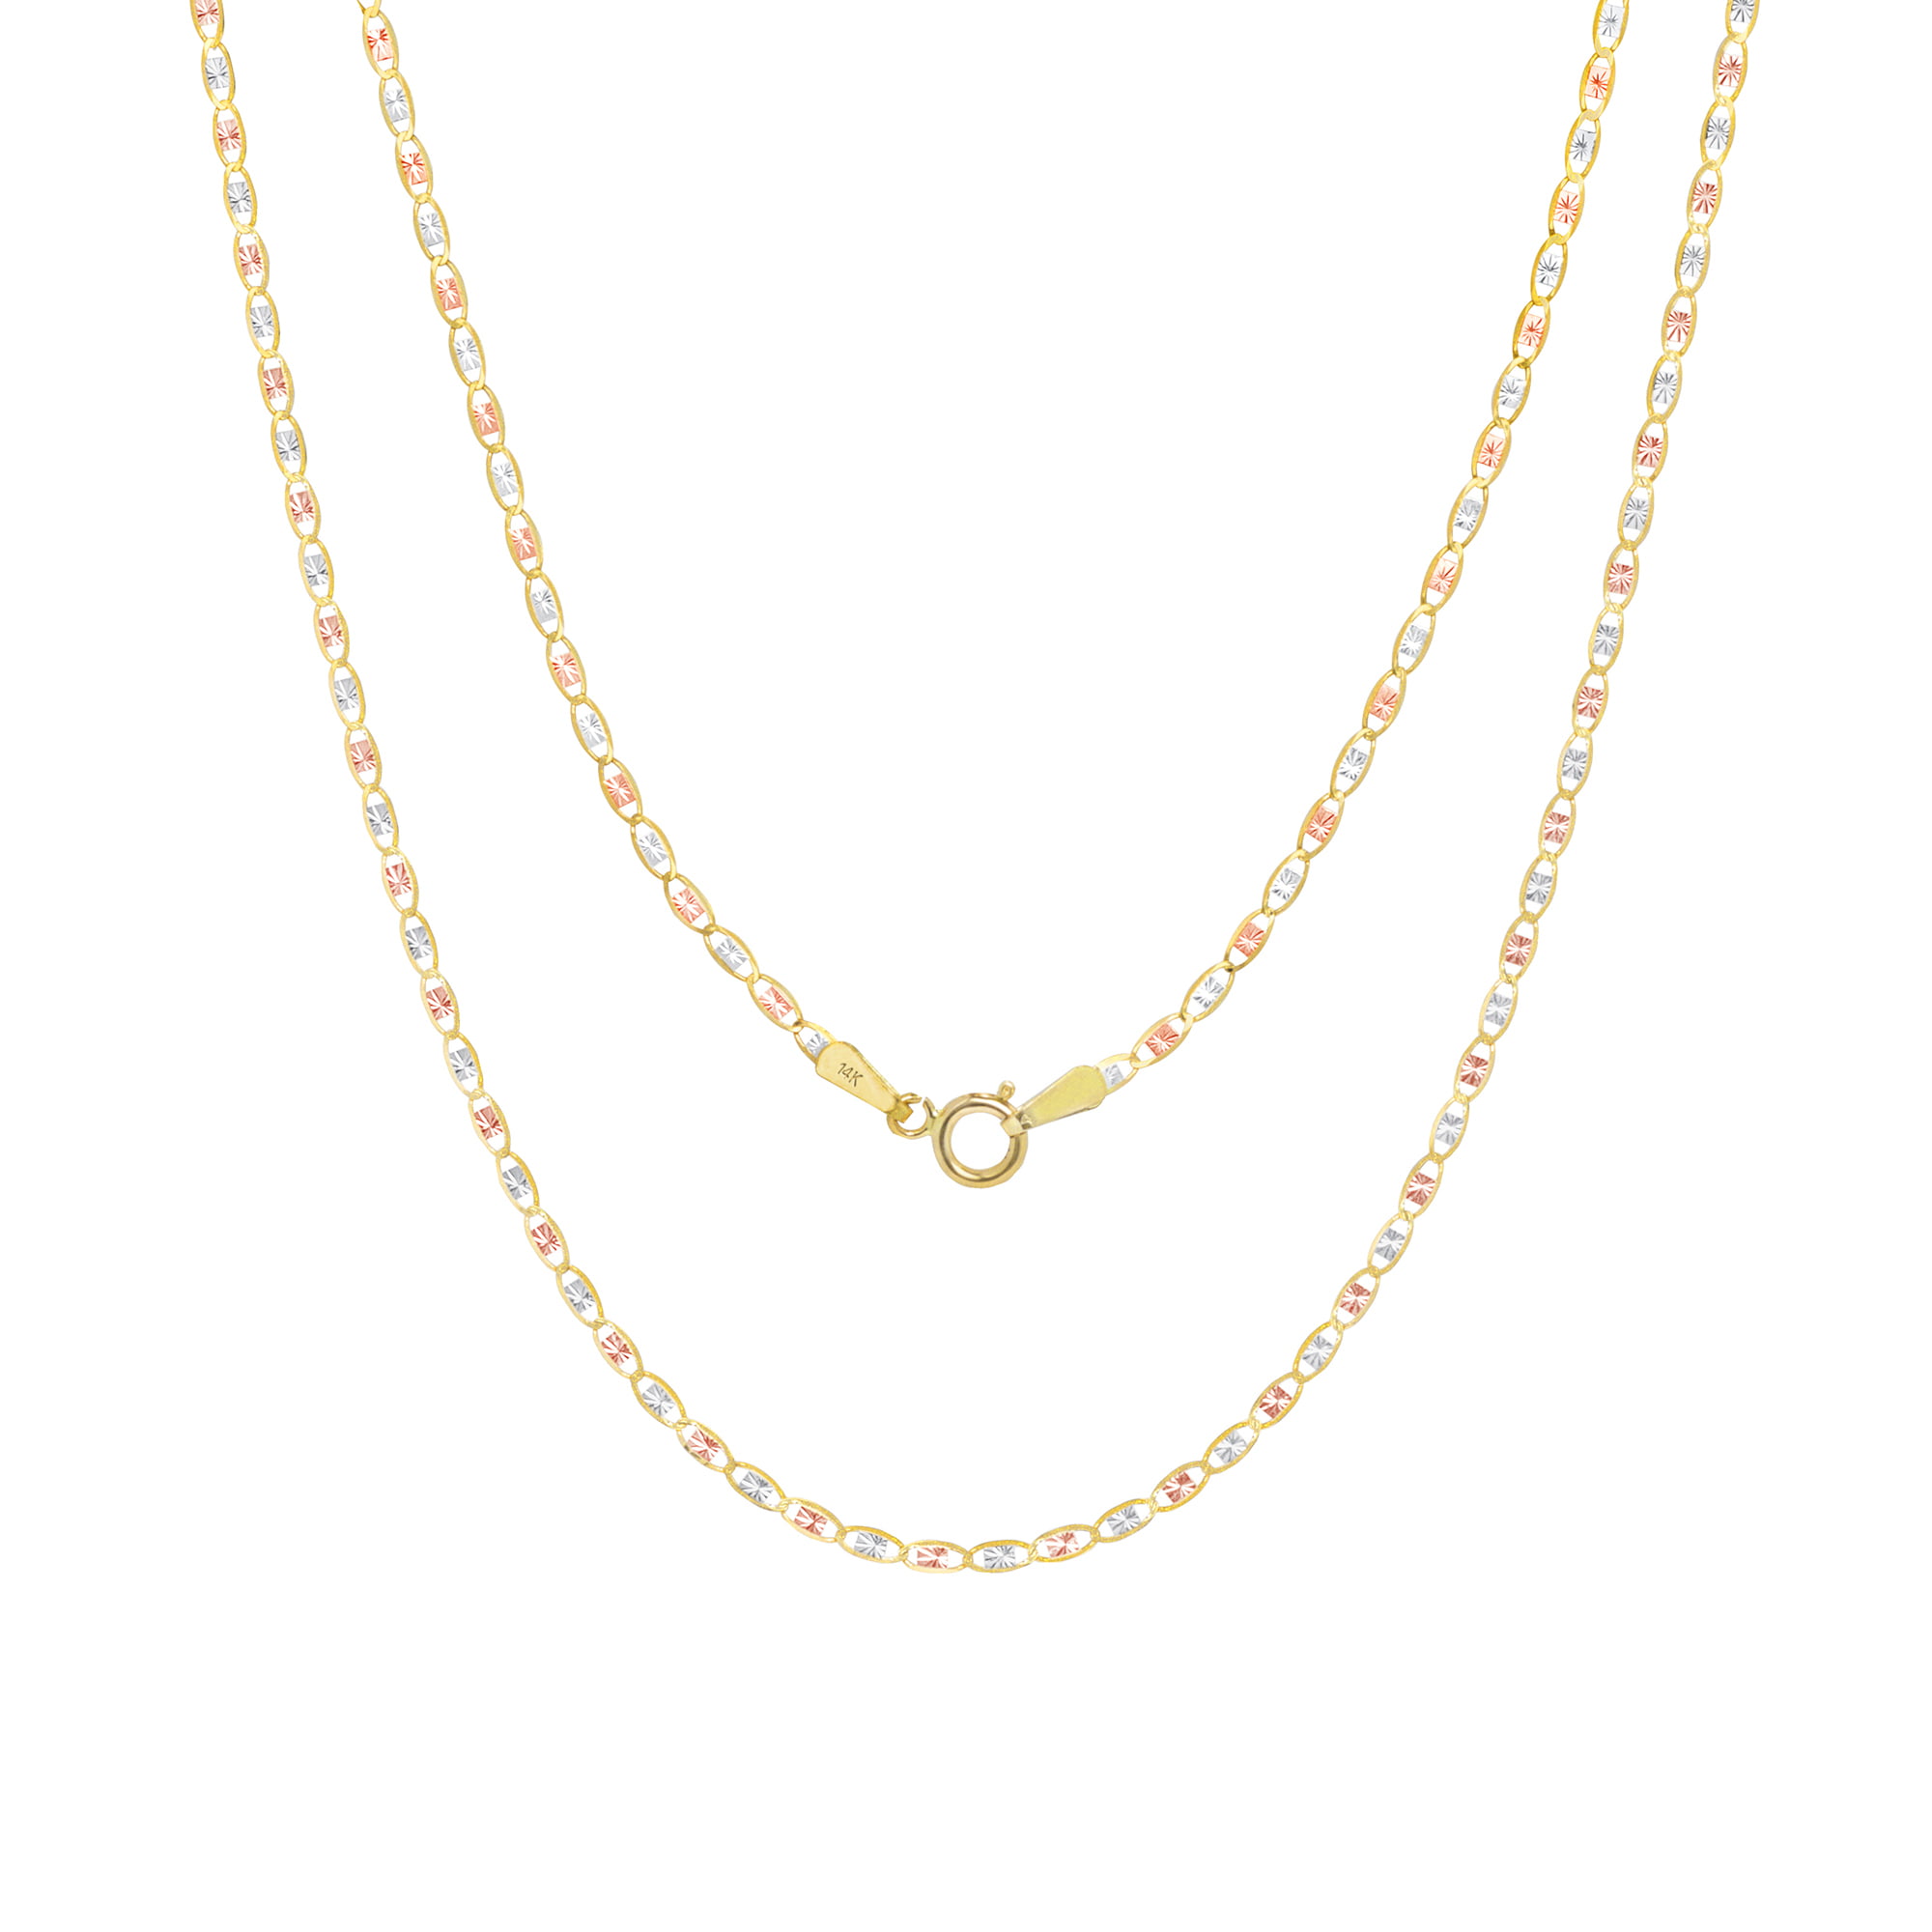 14K Solid Yellow White Rose Gold Valentino Necklace Chain 1.5mm 16-24" Women Men 